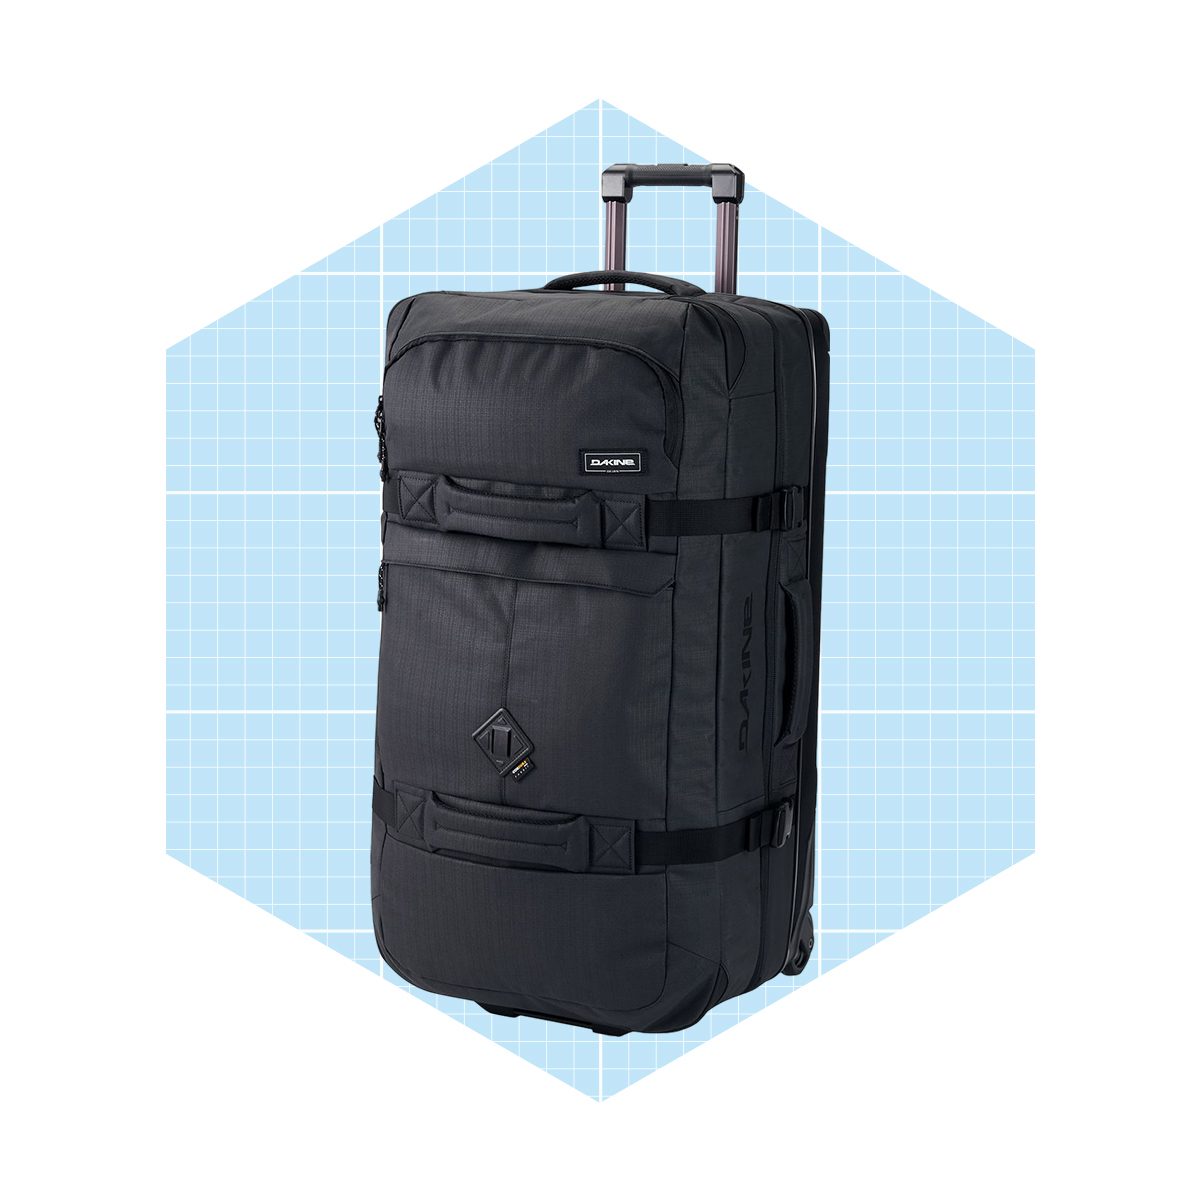 <p>Get ready to take on any adventure with the <a href="https://www.backcountry.com/dakine-split-roller-90-bag-5500cu-in" rel="noopener noreferrer">Dakine Split Roller Gear Bag</a>. With a whopping 5,500 cubic inches of storage space, this bag is built to accommodate everything you need. The unique split-level design provides easy access to all your gear, while the multiple compartments and pockets allow for effortless organization. The gear bag has durable construction and a rugged exterior but still easily fits into a <a href="https://www.familyhandyman.com/list/car-organizers-that-will-keep-your-ride-clean/" rel="noopener noreferrer">crowded trunk.</a> Easily move it around with its heavy-duty wheels and retractable handle.</p> <p class="listicle-page__cta-button-shop"><a class="shop-btn" href="https://www.backcountry.com/dakine-split-roller-90-bag-5500cu-in">Shop Now</a></p>